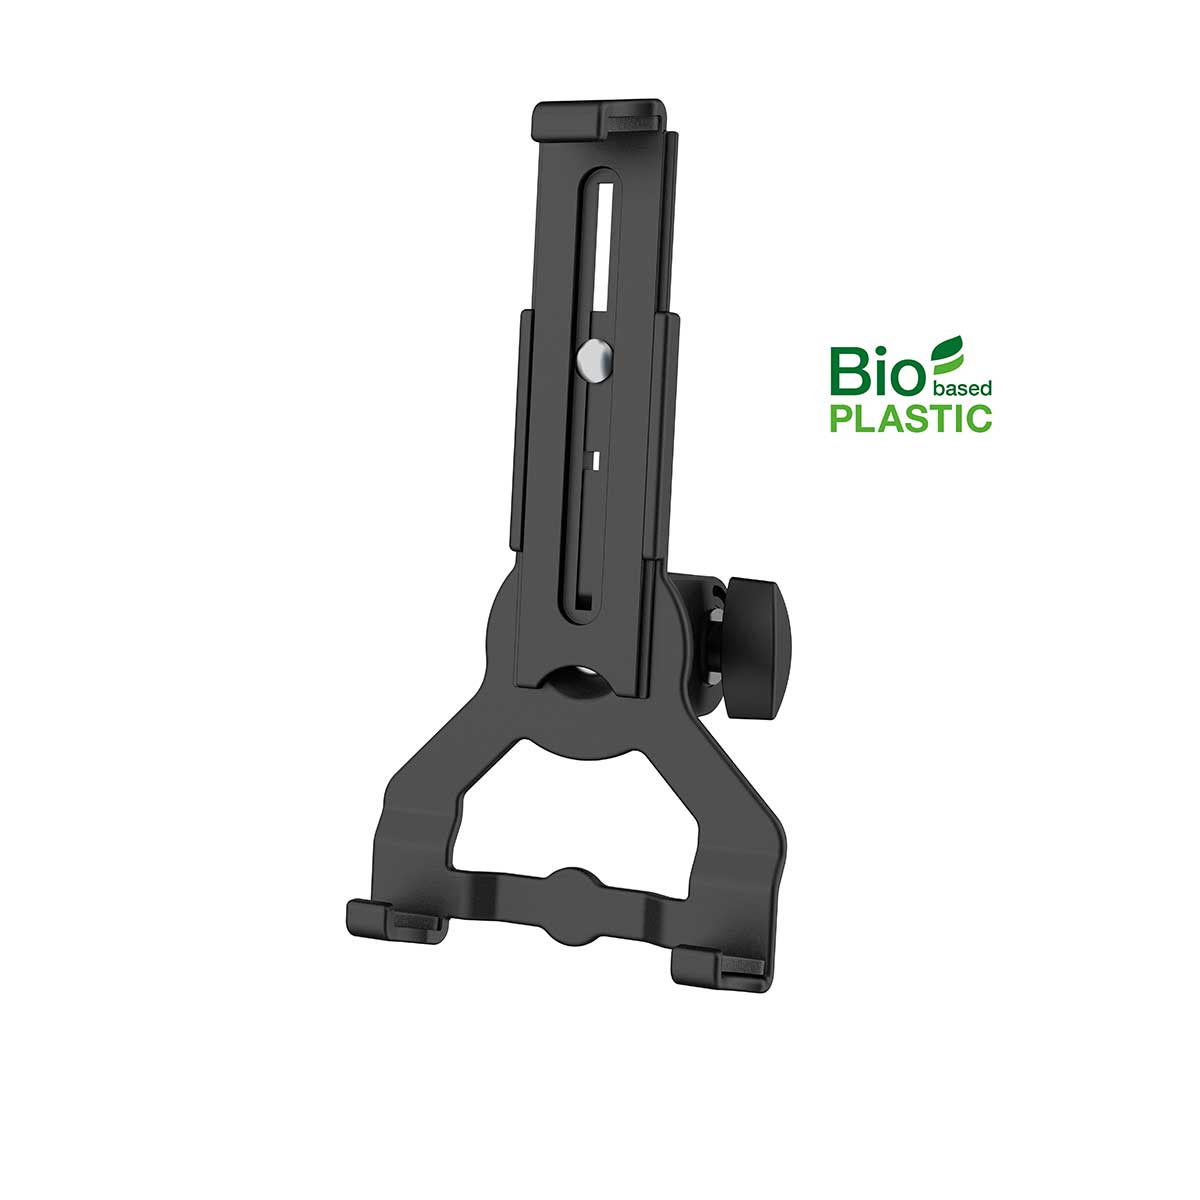 K&M 19766 Tablet PC stand holder (Biobased)